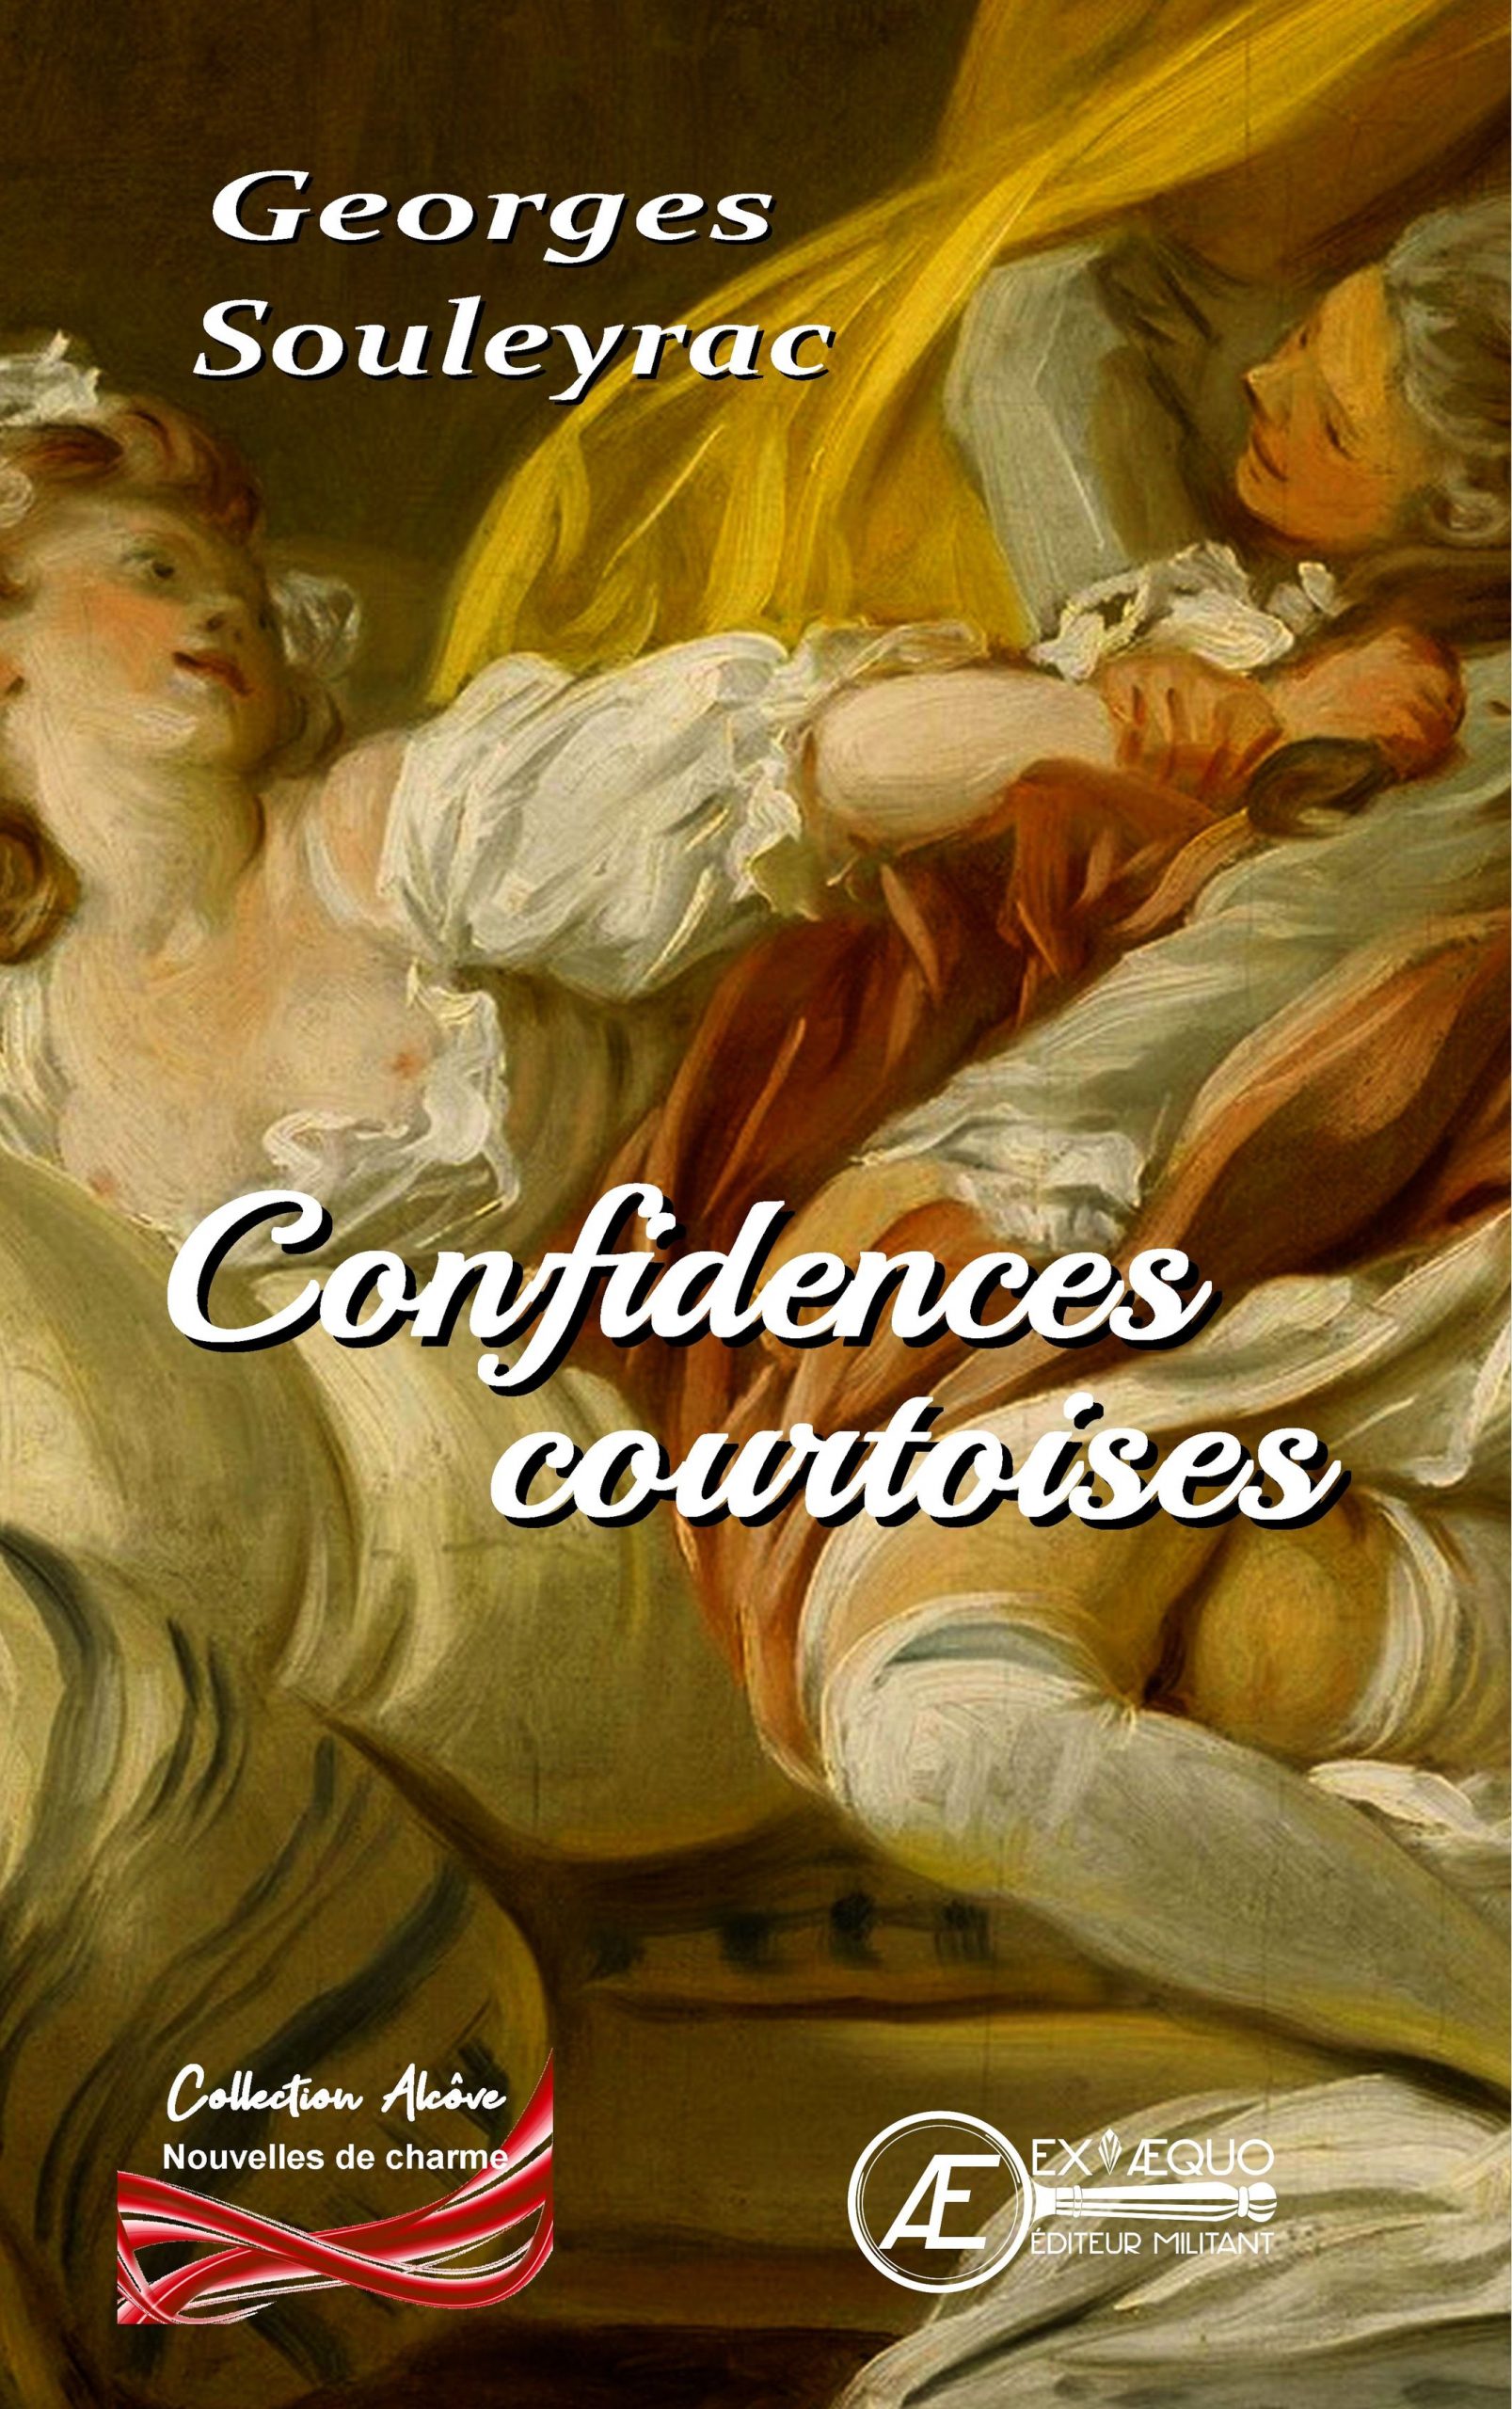 You are currently viewing Confidences courtoises, de Georges Souleyrac